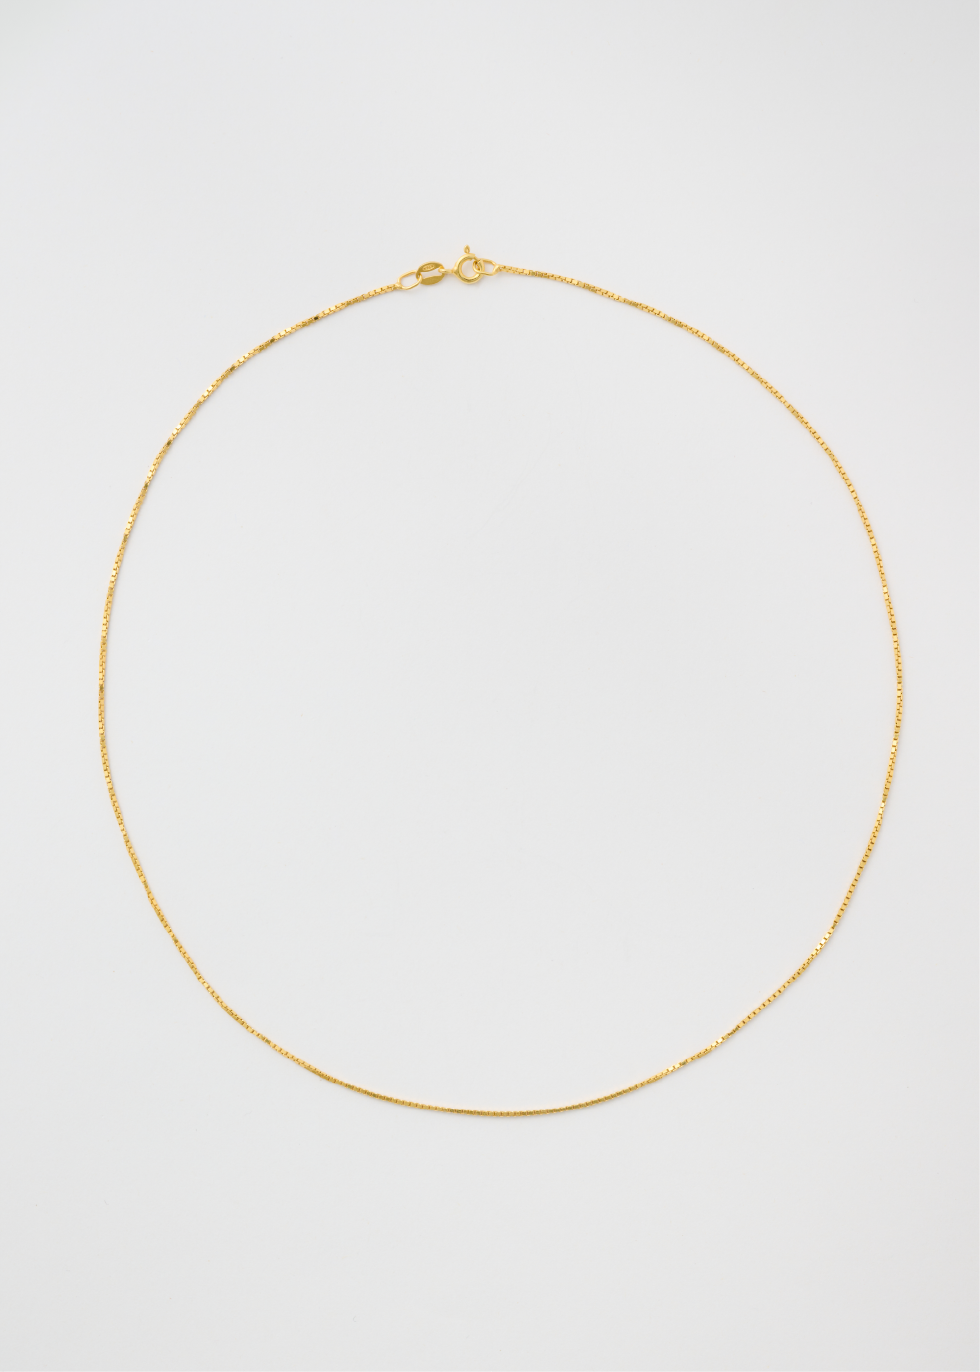  venezia gold plated necklace by sad 1mm